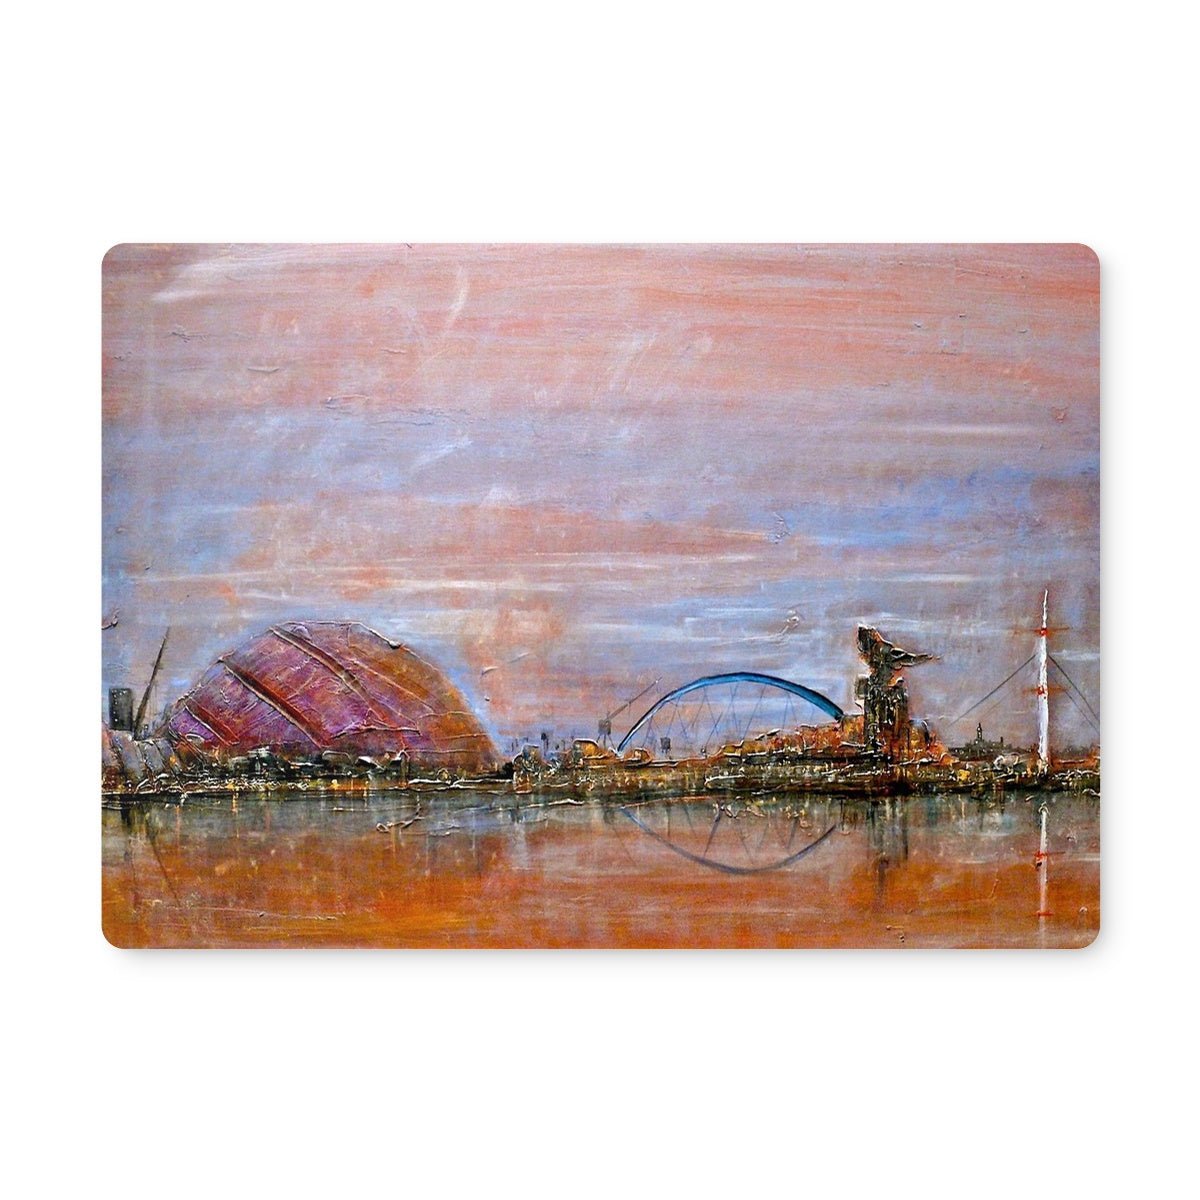 Glasgow Harbour Art Gifts Placemat-Placemats-Edinburgh & Glasgow Art Gallery-2 Placemats-Paintings, Prints, Homeware, Art Gifts From Scotland By Scottish Artist Kevin Hunter